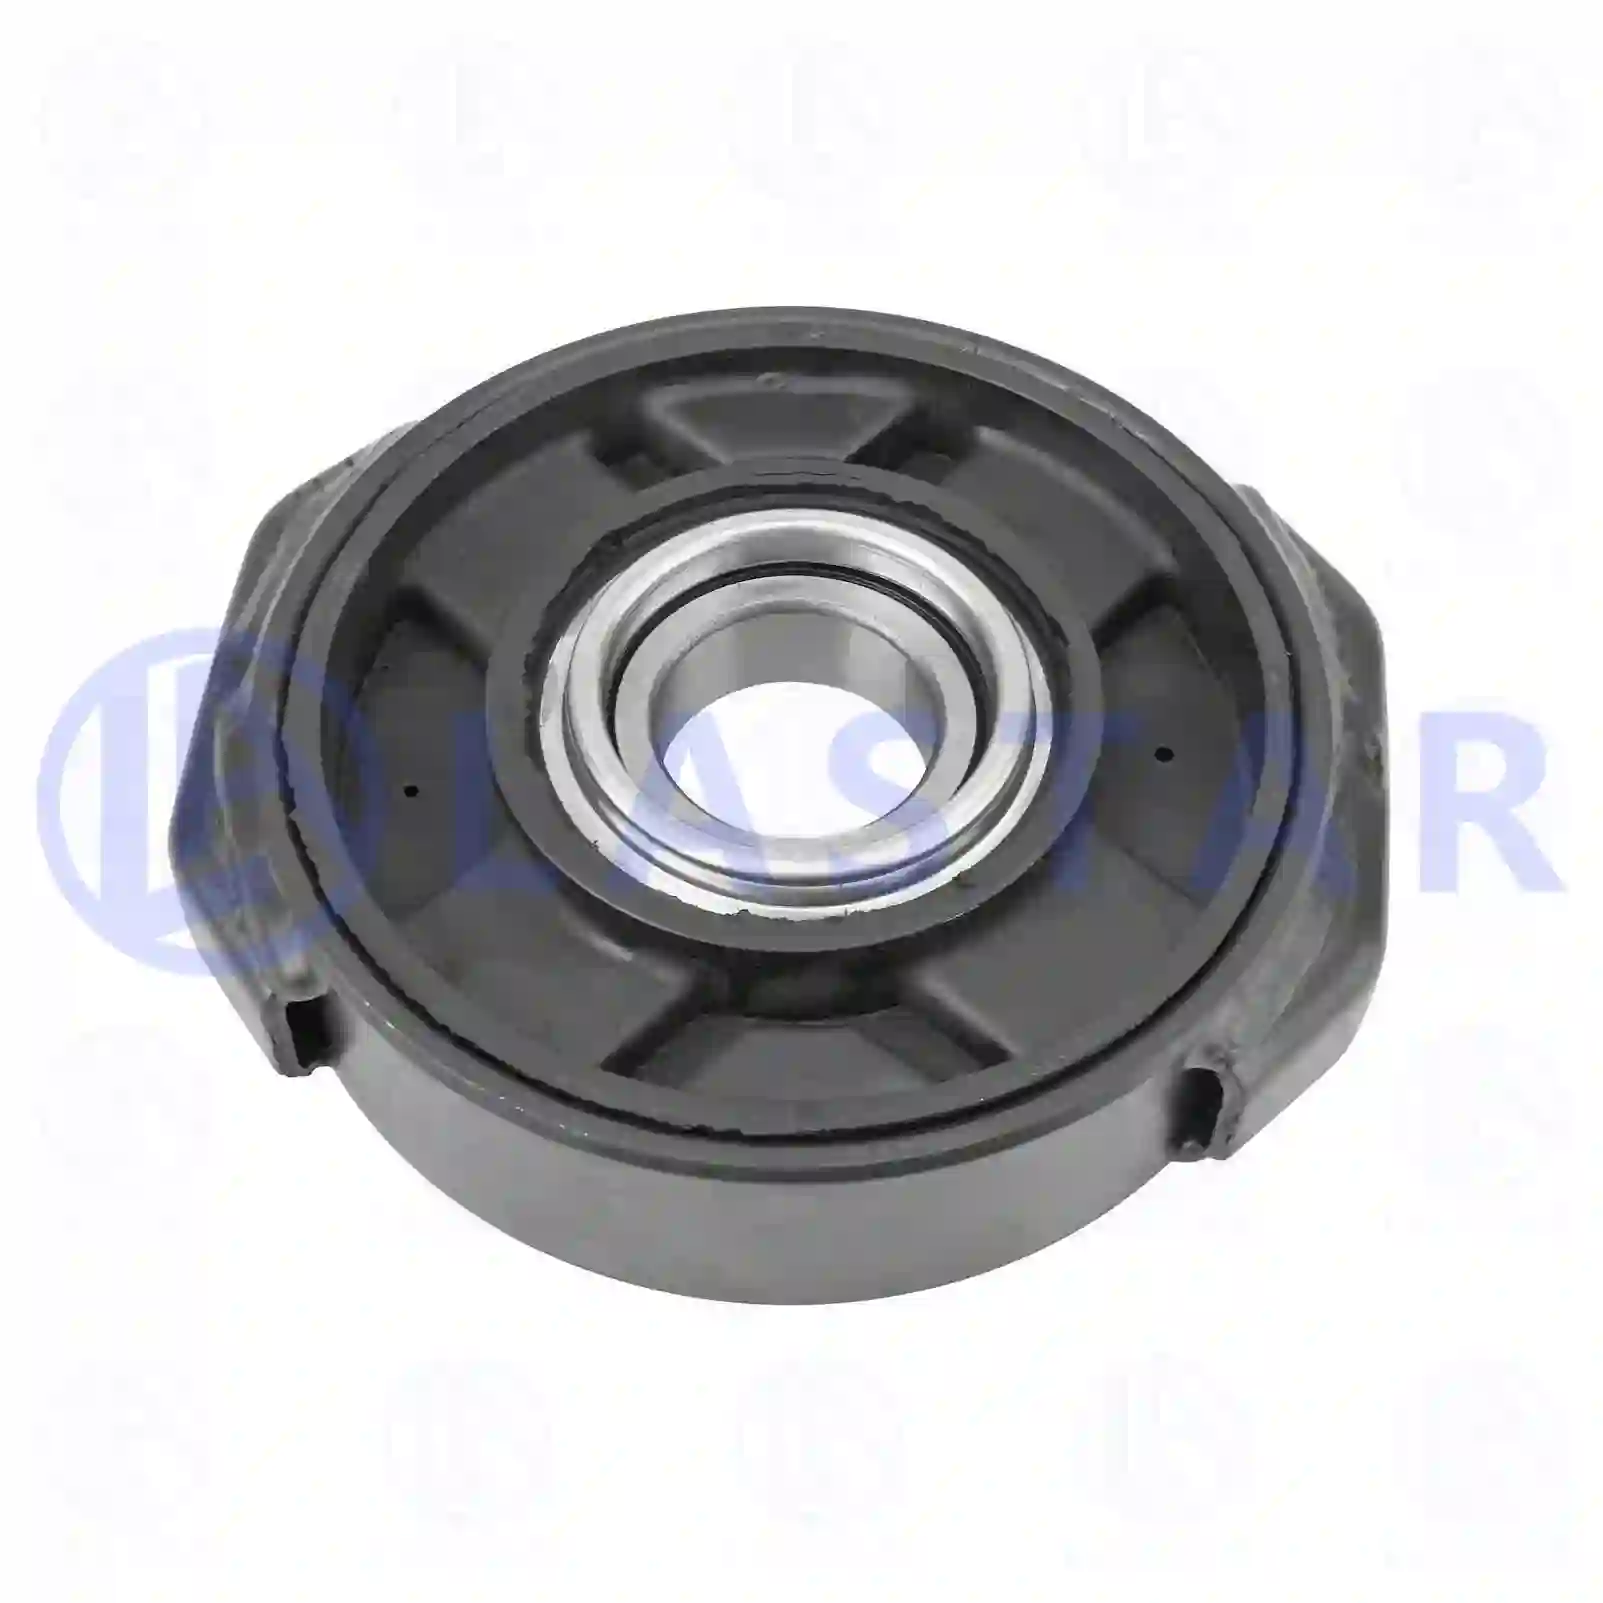 Support Bearing Center bearing, la no: 77734256 ,  oem no:3814100010, 3814100222, 3814100422, 3814101222, 3814101522, 3854100010, 3854101522, 3855860041, 3954100222, 3954100422, ZG02481-0008 Lastar Spare Part | Truck Spare Parts, Auotomotive Spare Parts